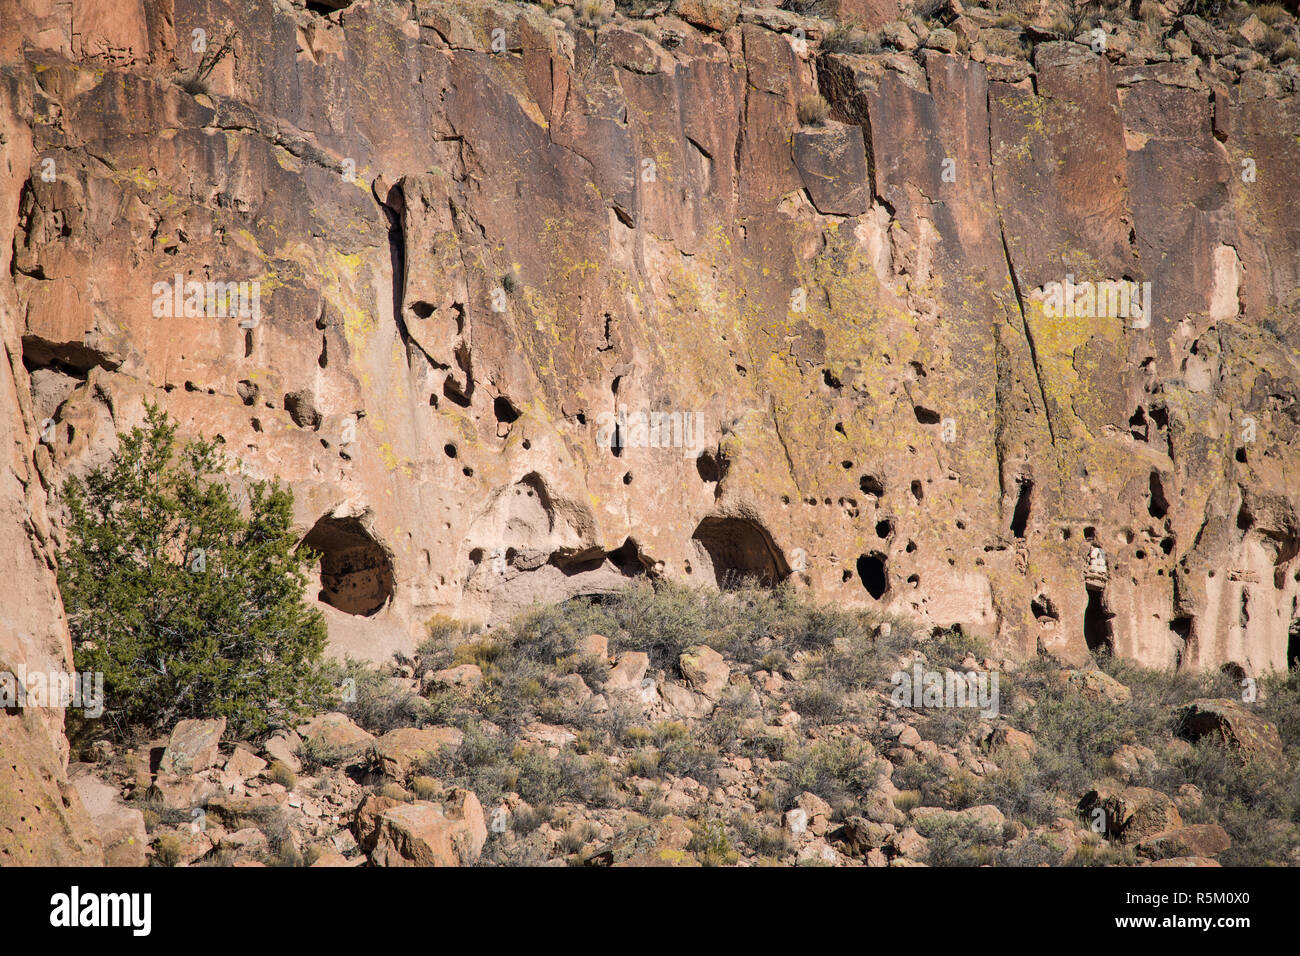 Caves and abandoned ancient ruins in a colorful cliff in Bandelier National Monument near Santa Fe, New Mexico Stock Photo